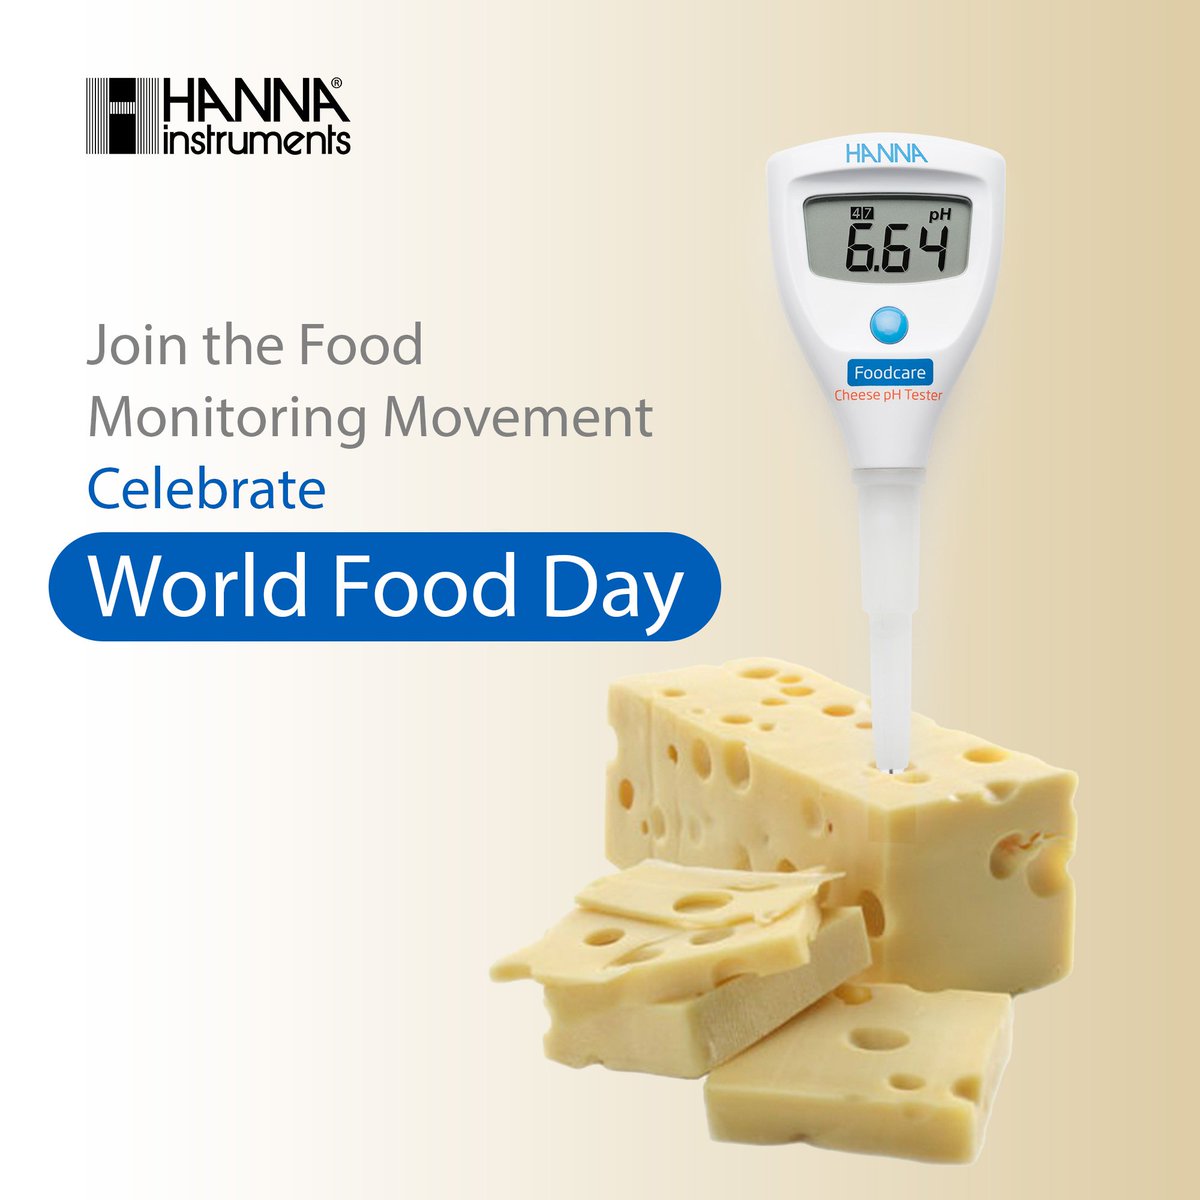 On World Food Day, let's raise awareness about the importance of food safety and quality with Hanna Instruments.
To Know more about our Foodcare Meters, visit the link below :
hannainst.in/brands/foodcare

#FoodStandards #WorldFoodDay #FoodSafety #FoodQuality #HannaInstruments